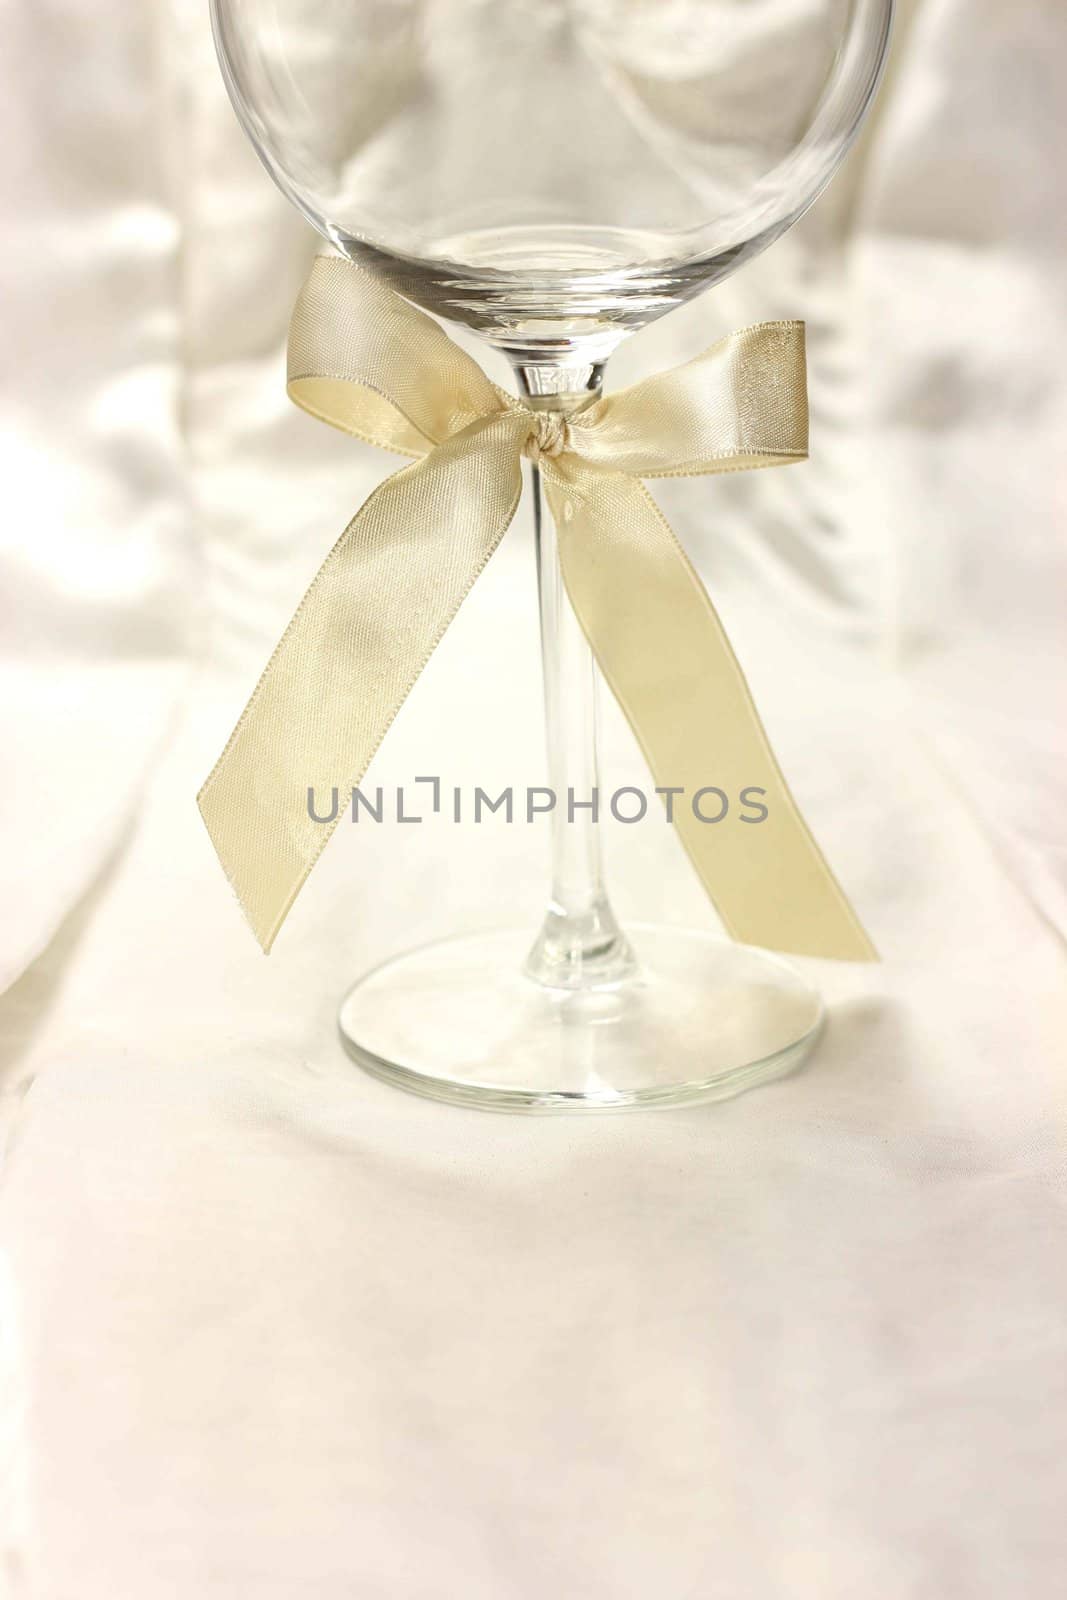 Wineglass with ribbon on silk fair background